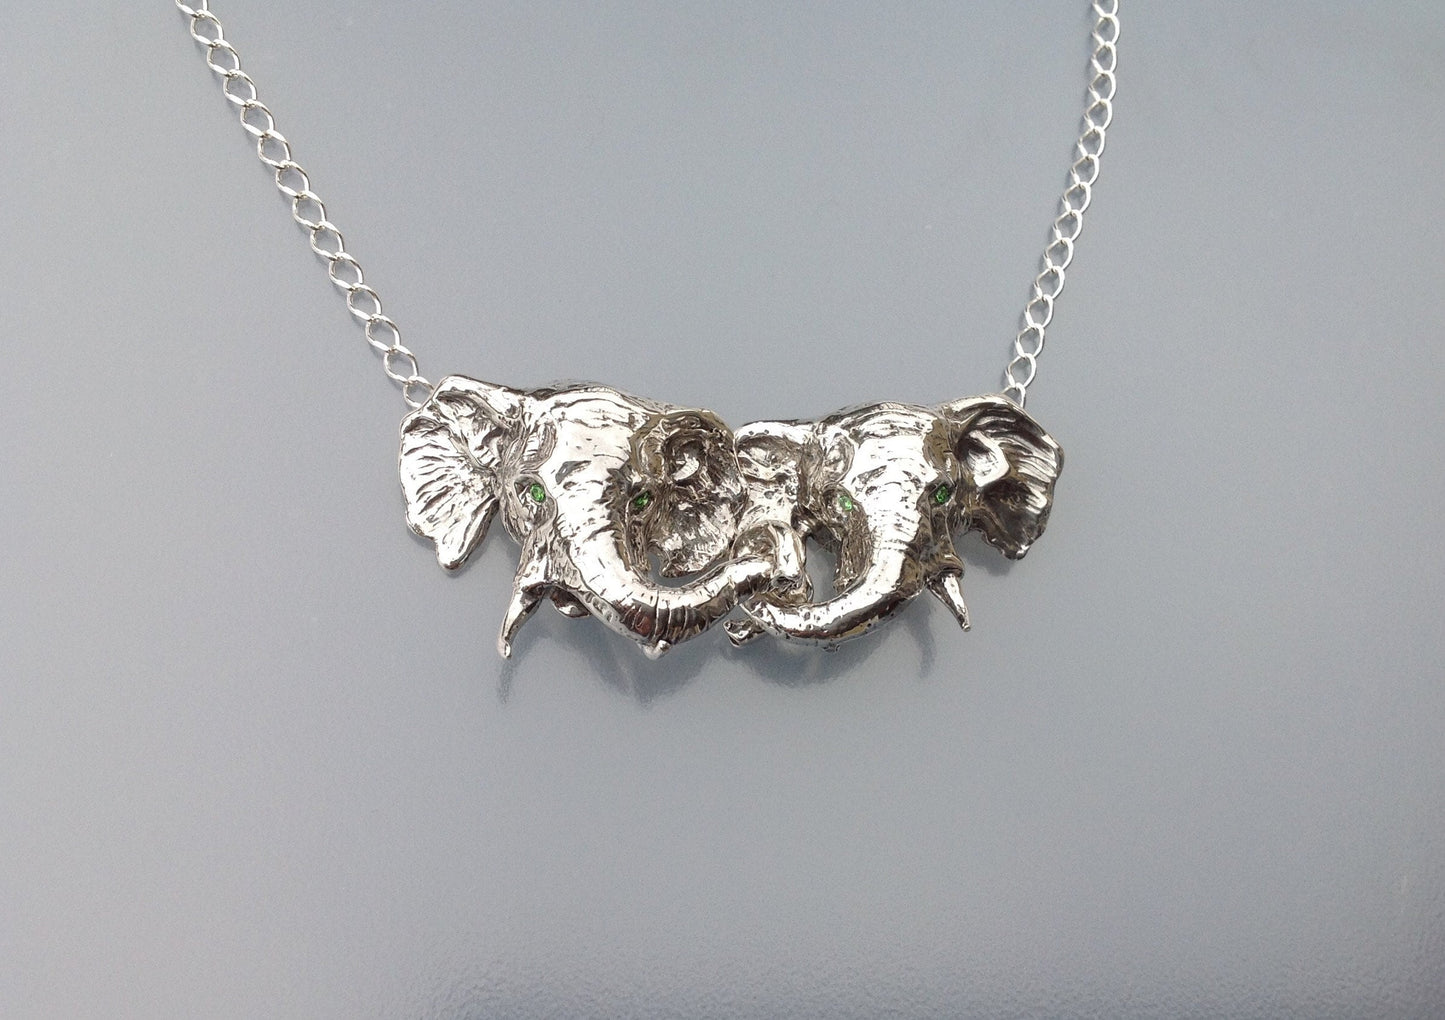 ORDER for:  Extraordinary Elephant necklace Sterling Silver, articulating pendant.  Sculptural Jewelry  Zimmer